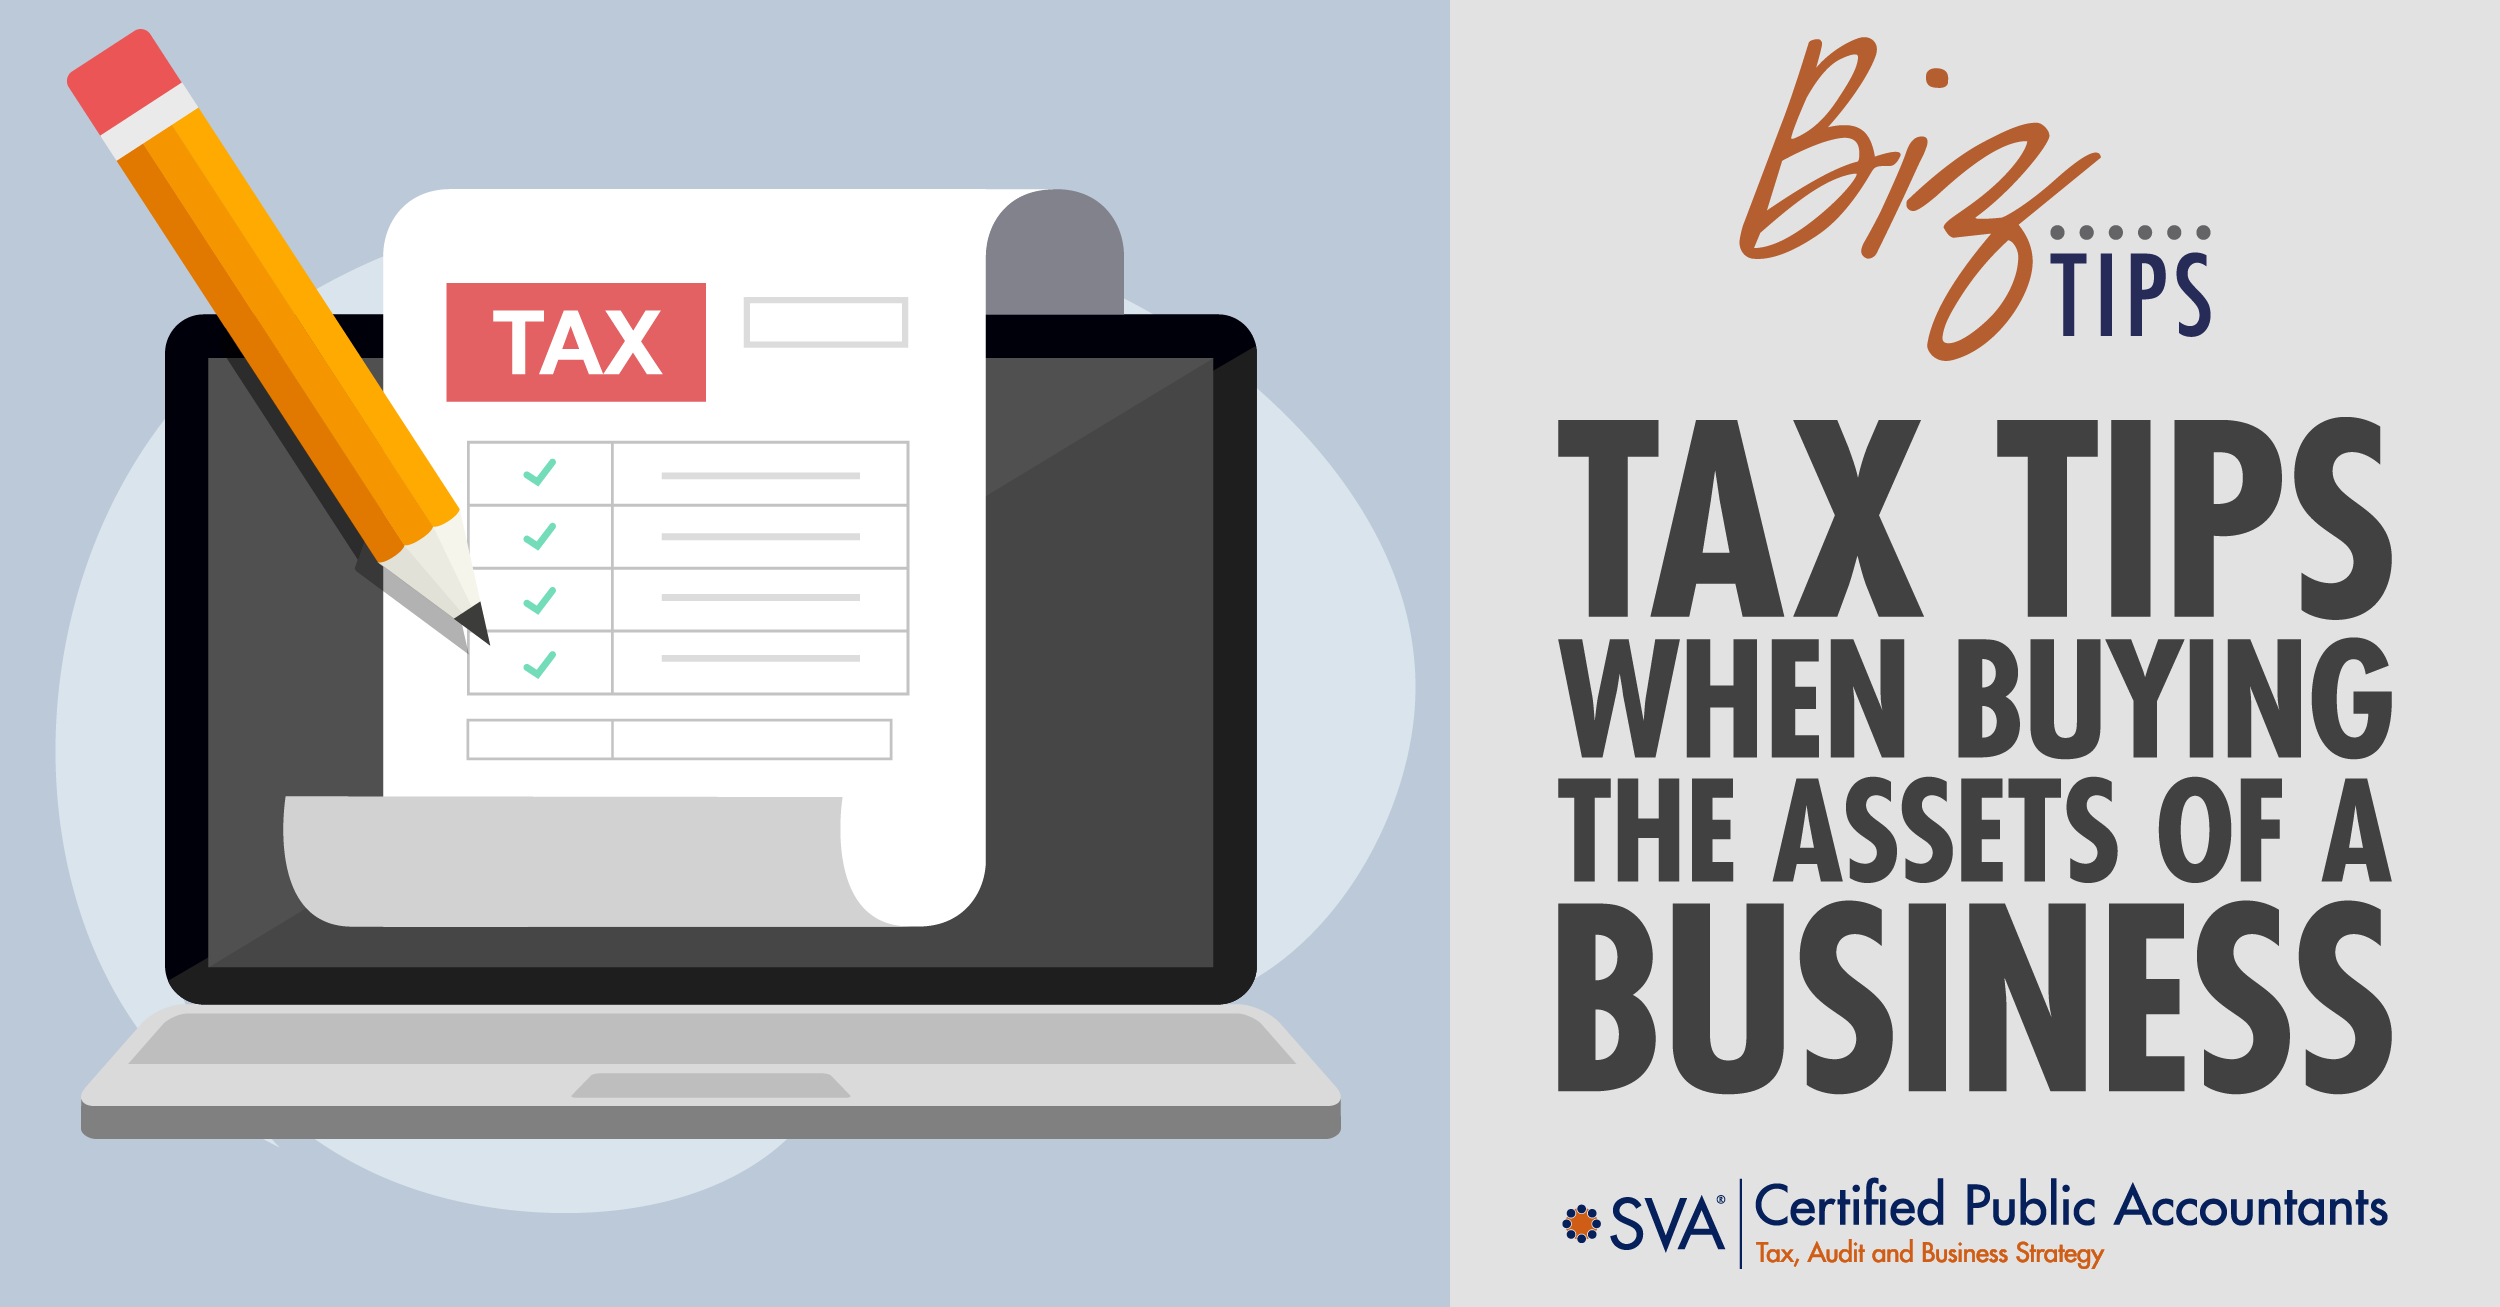 Tax Tips When Buying the Assets of a Business